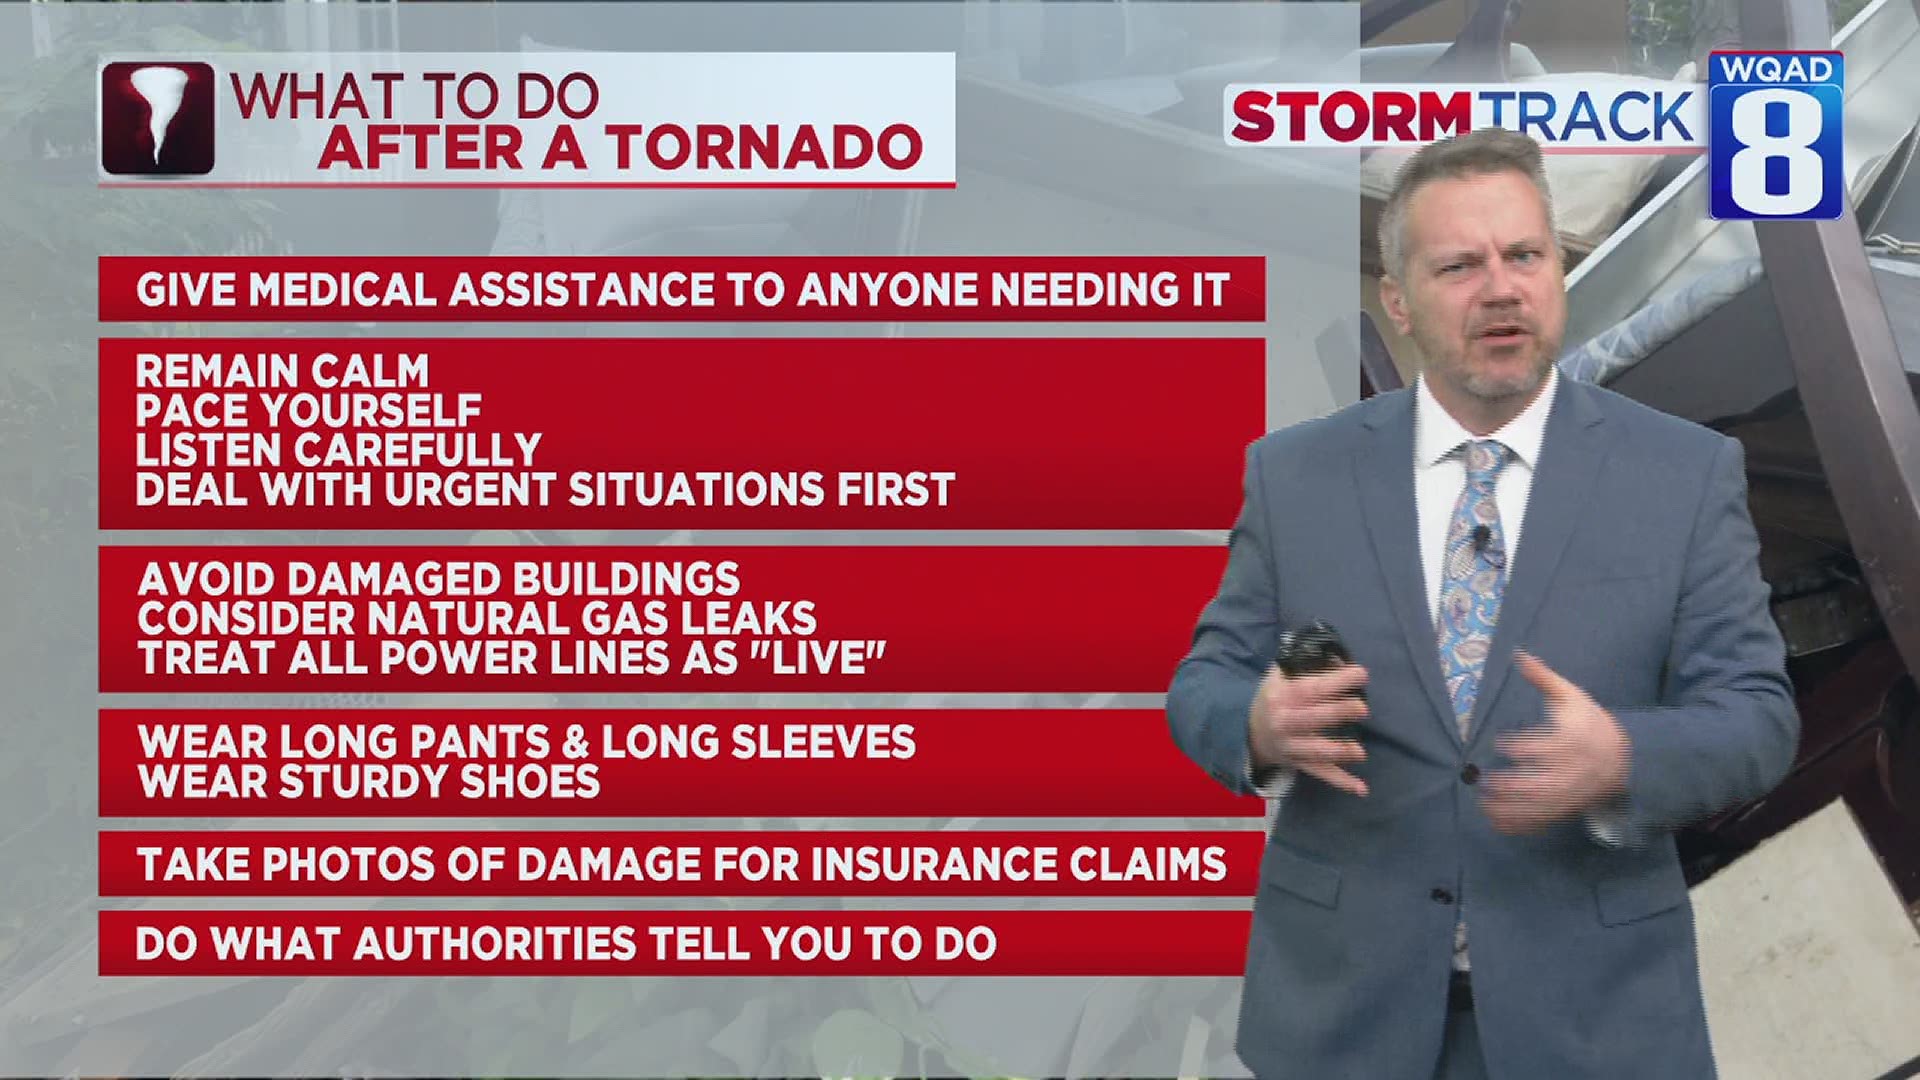 These things may be shared after a tornado, but the people who need the information probably won't get it.